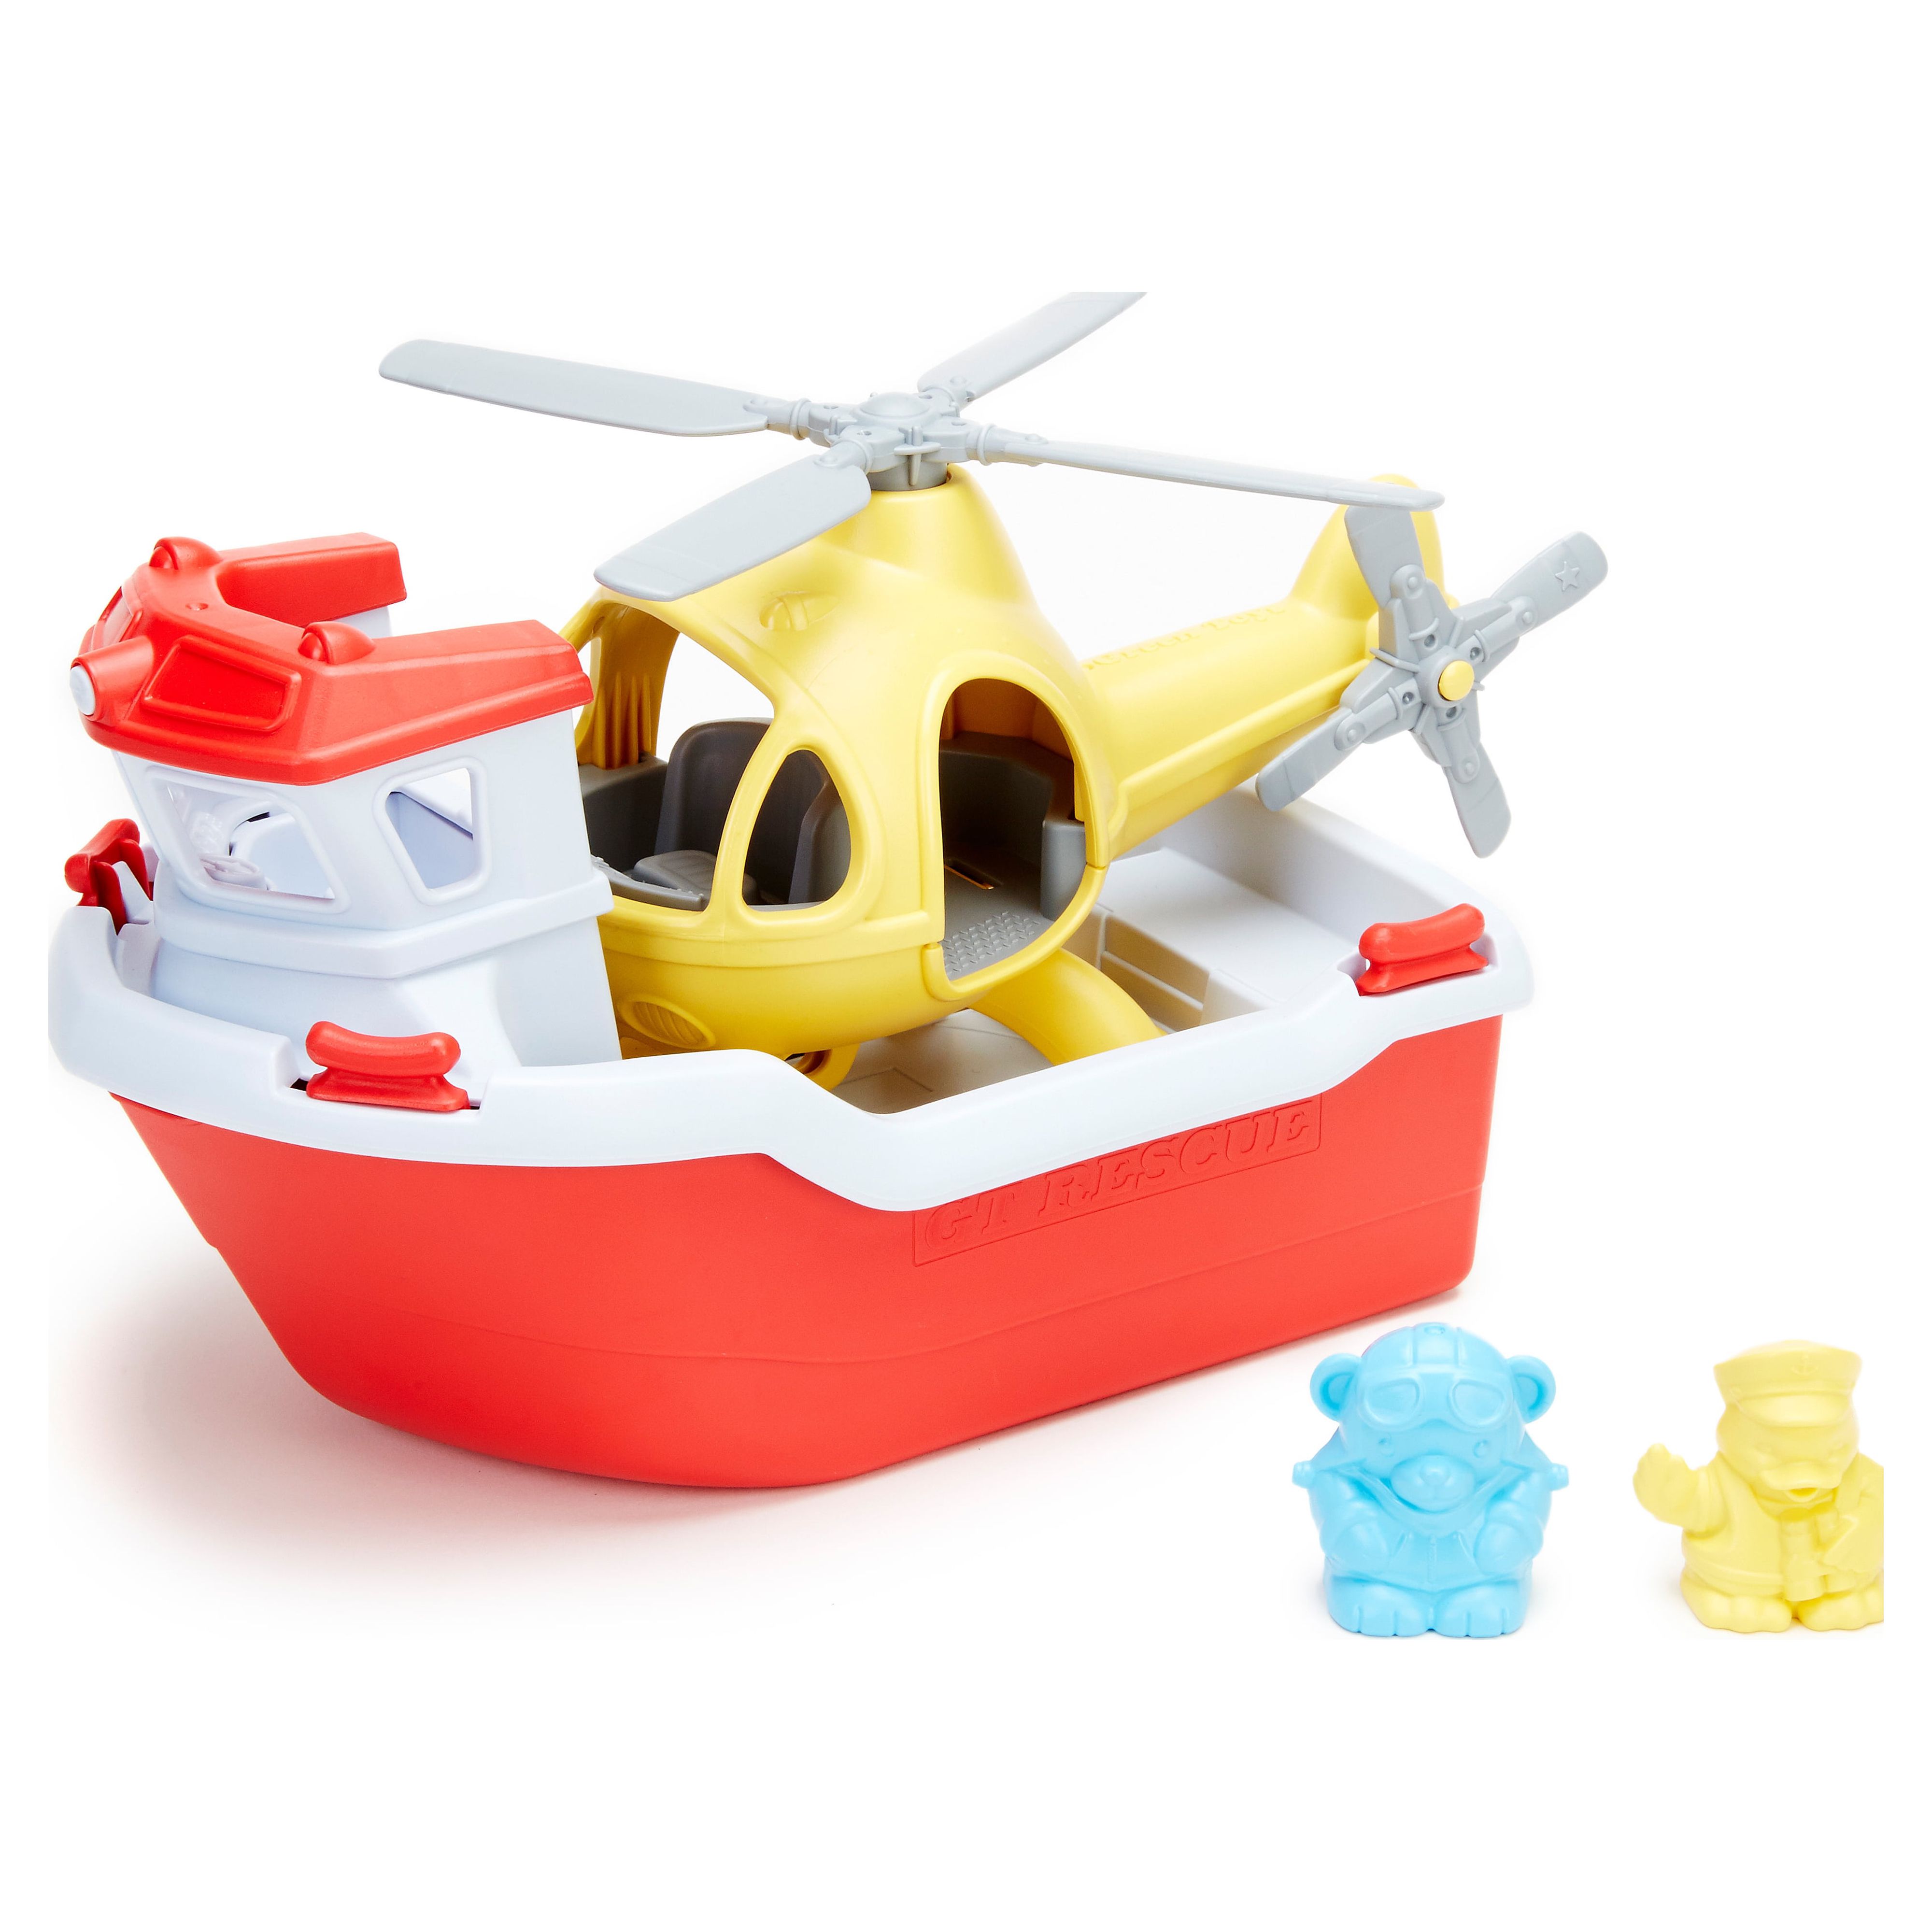 Green Toys Rescue Boat & Helicopter with a Captain Duck and Pilot Bear - image 1 of 10